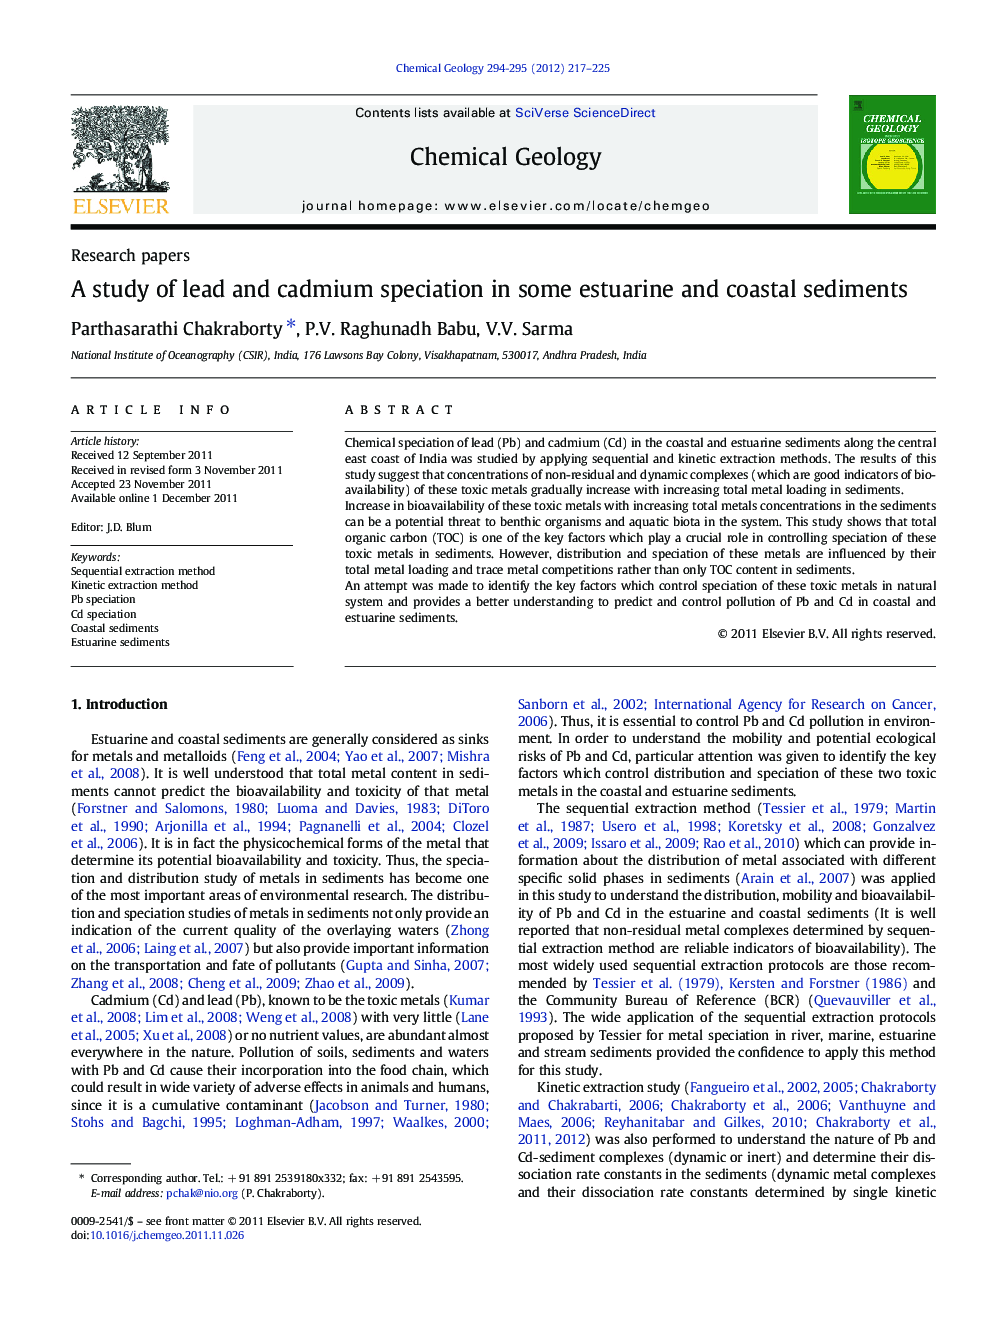 A study of lead and cadmium speciation in some estuarine and coastal sediments